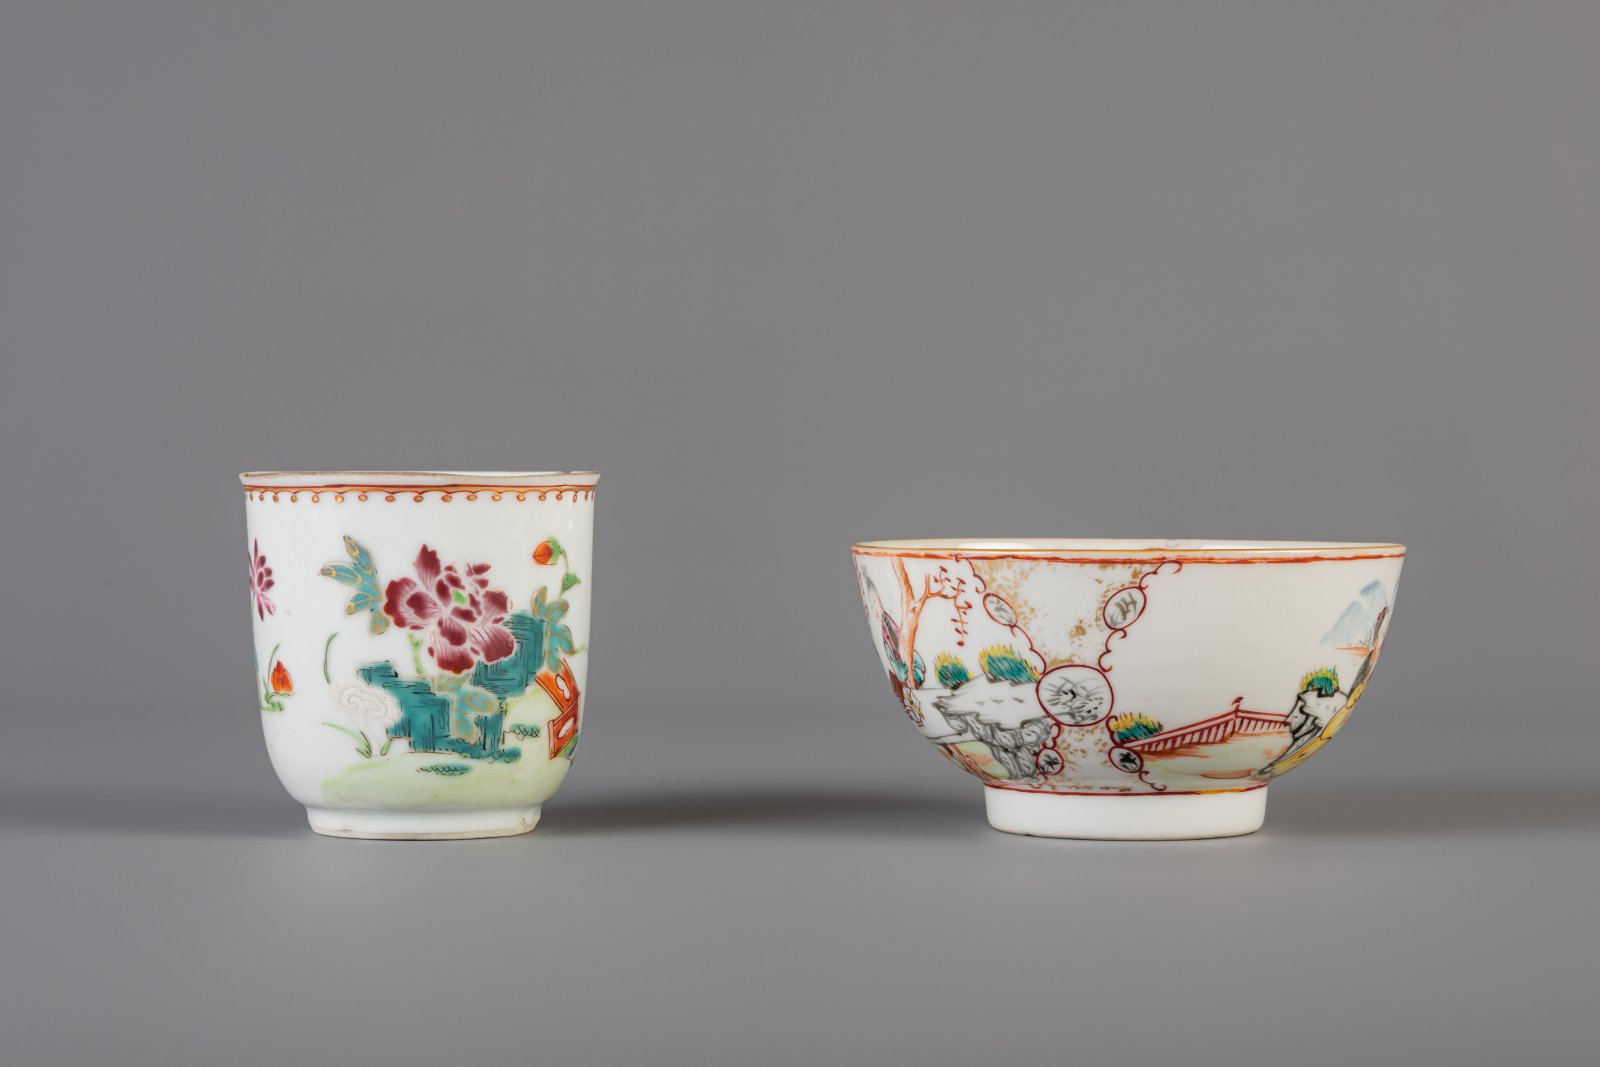 A varied collection of Chinese porcelain, 18th/19th C. - Image 9 of 13